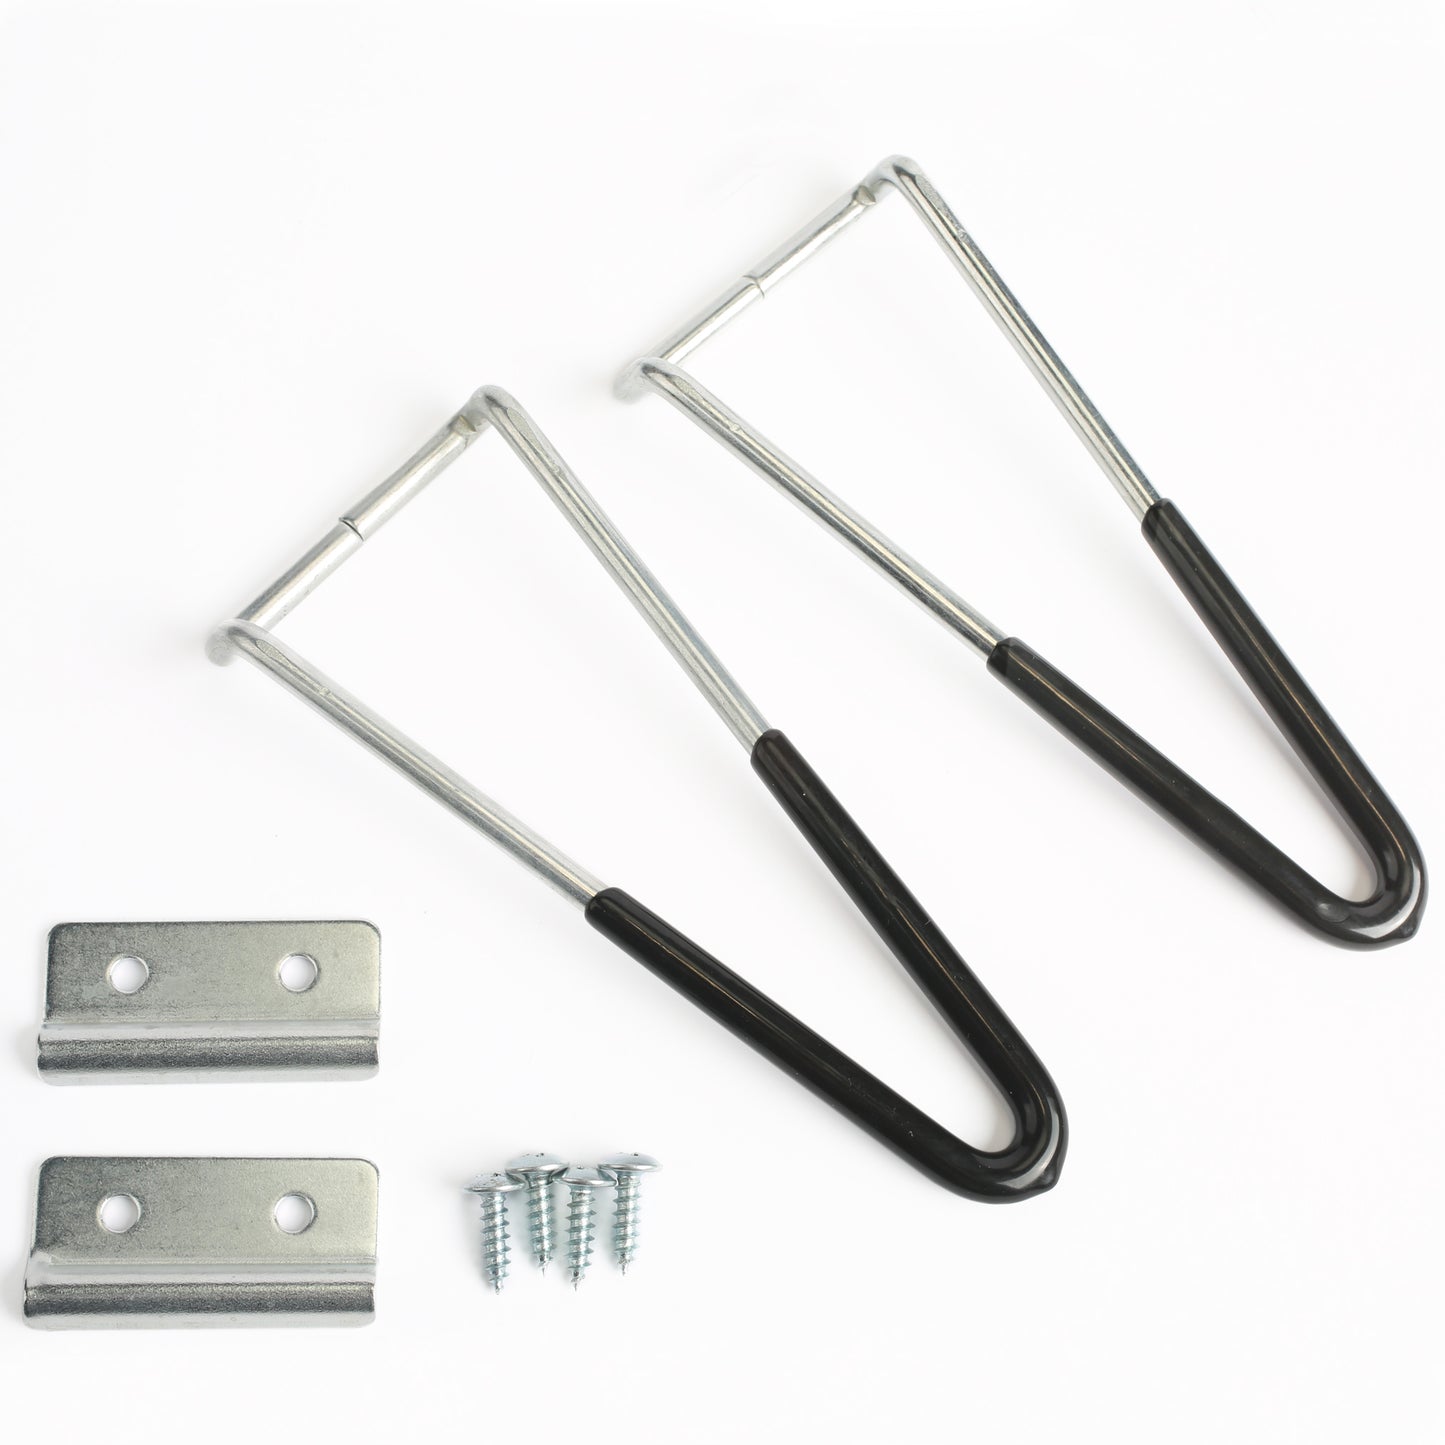 Leg Replacement Kit for PXB31, PXB36, and PXB42